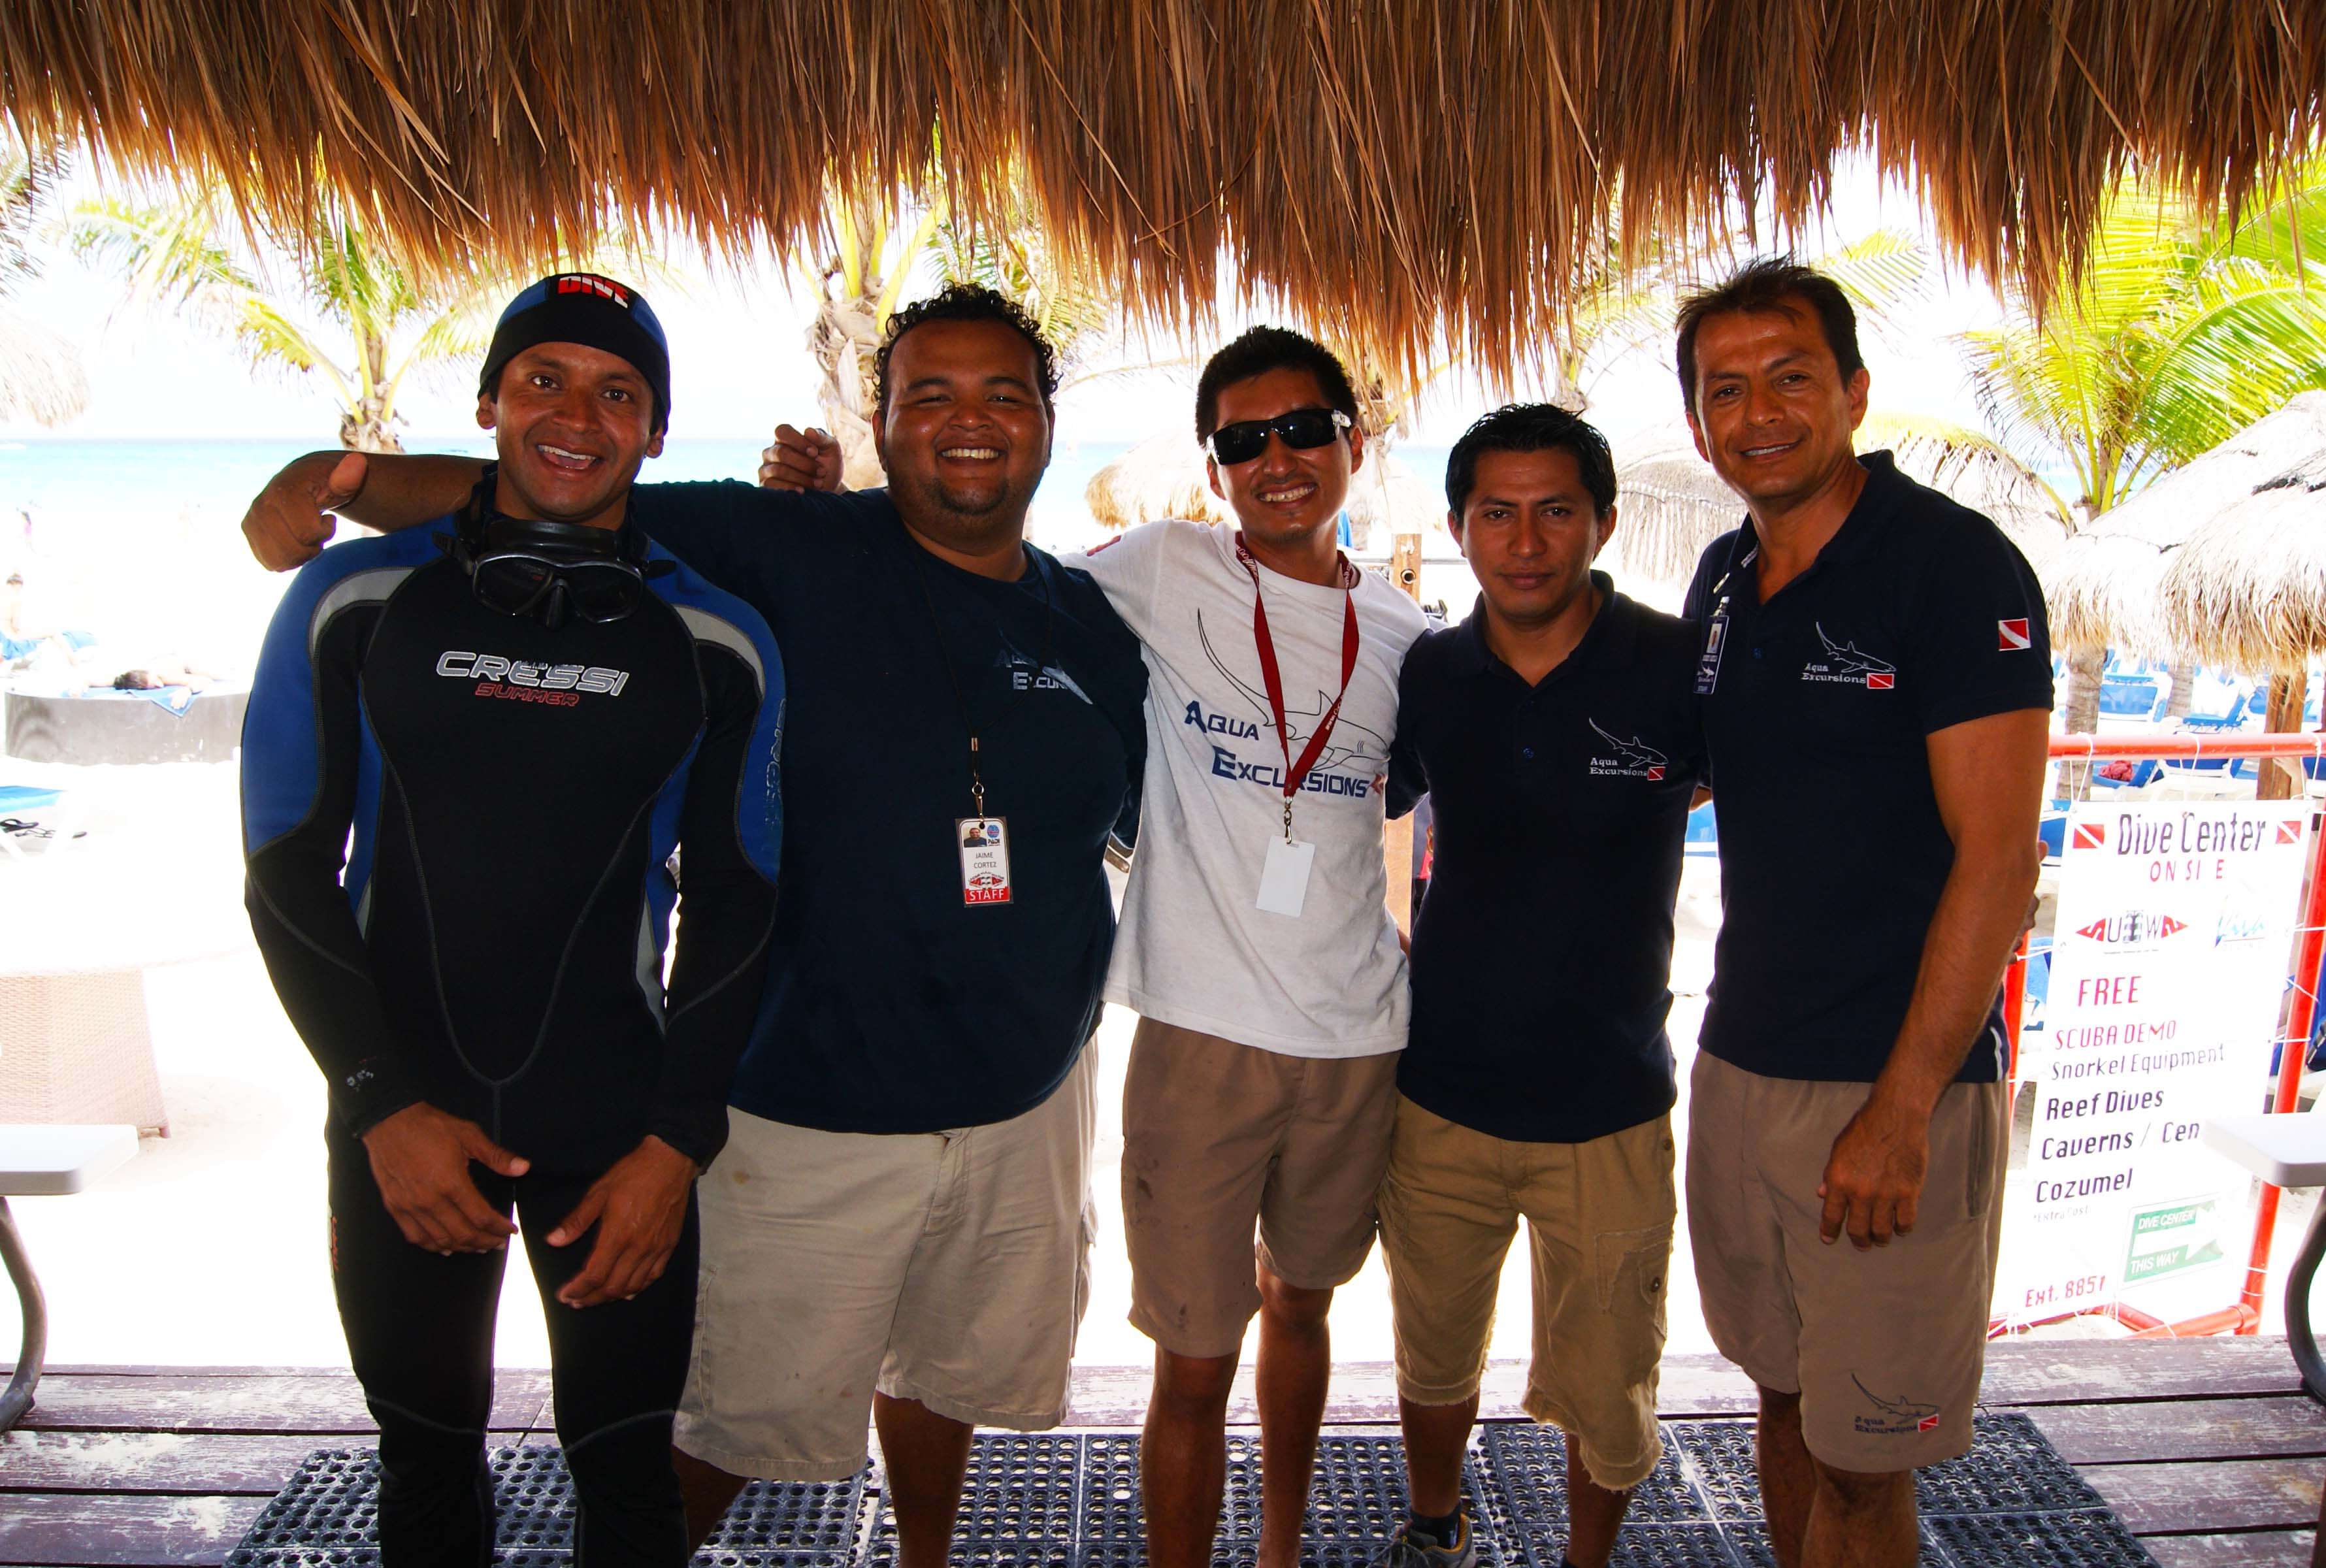 Base leaders, captains, crew members, divemasters and instructors